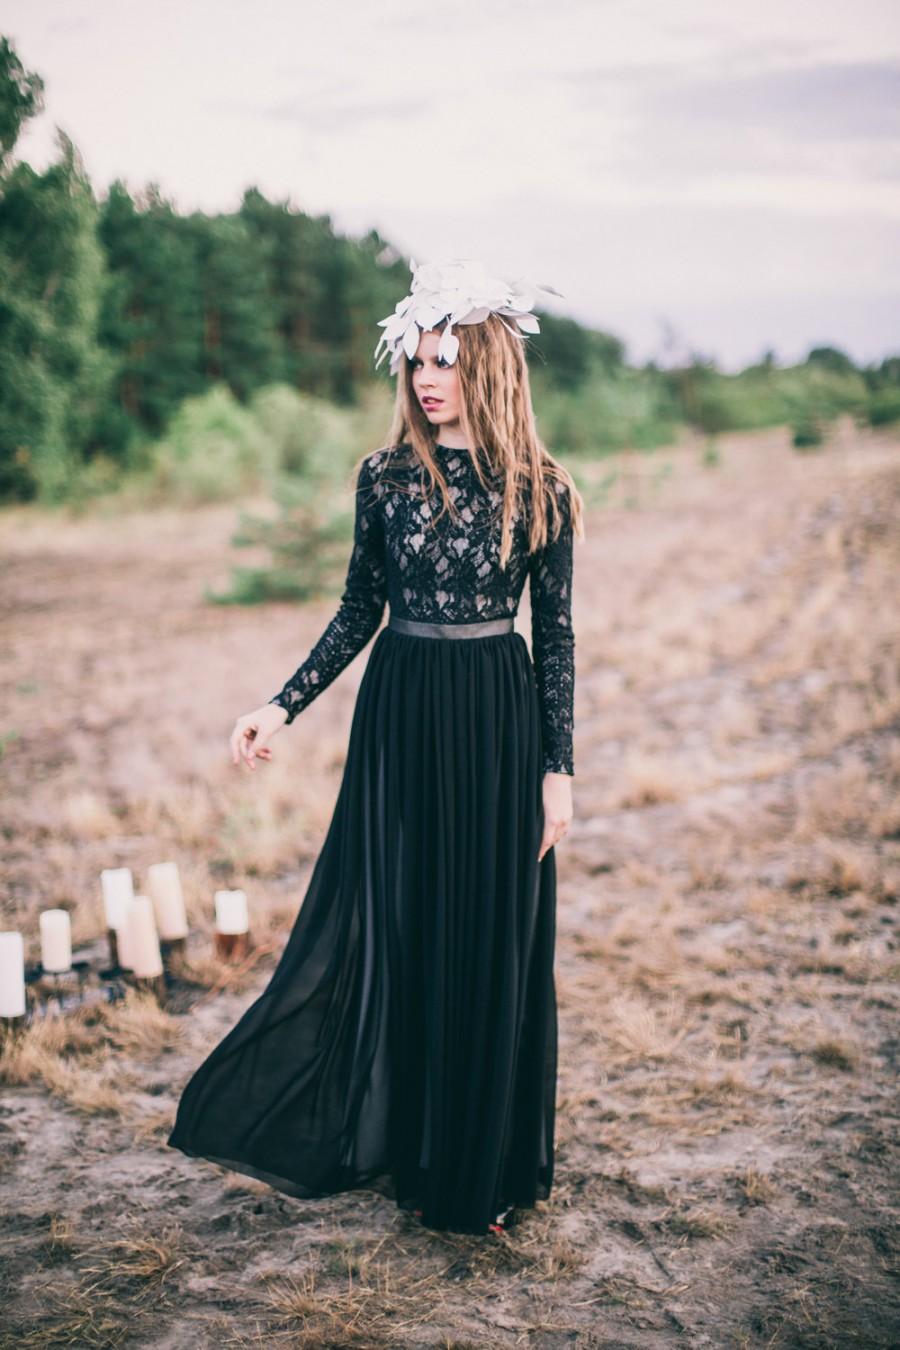 Wedding - Black a-line high-necked lace wedding dress with long sleeves and flowing layered chiffon skirt